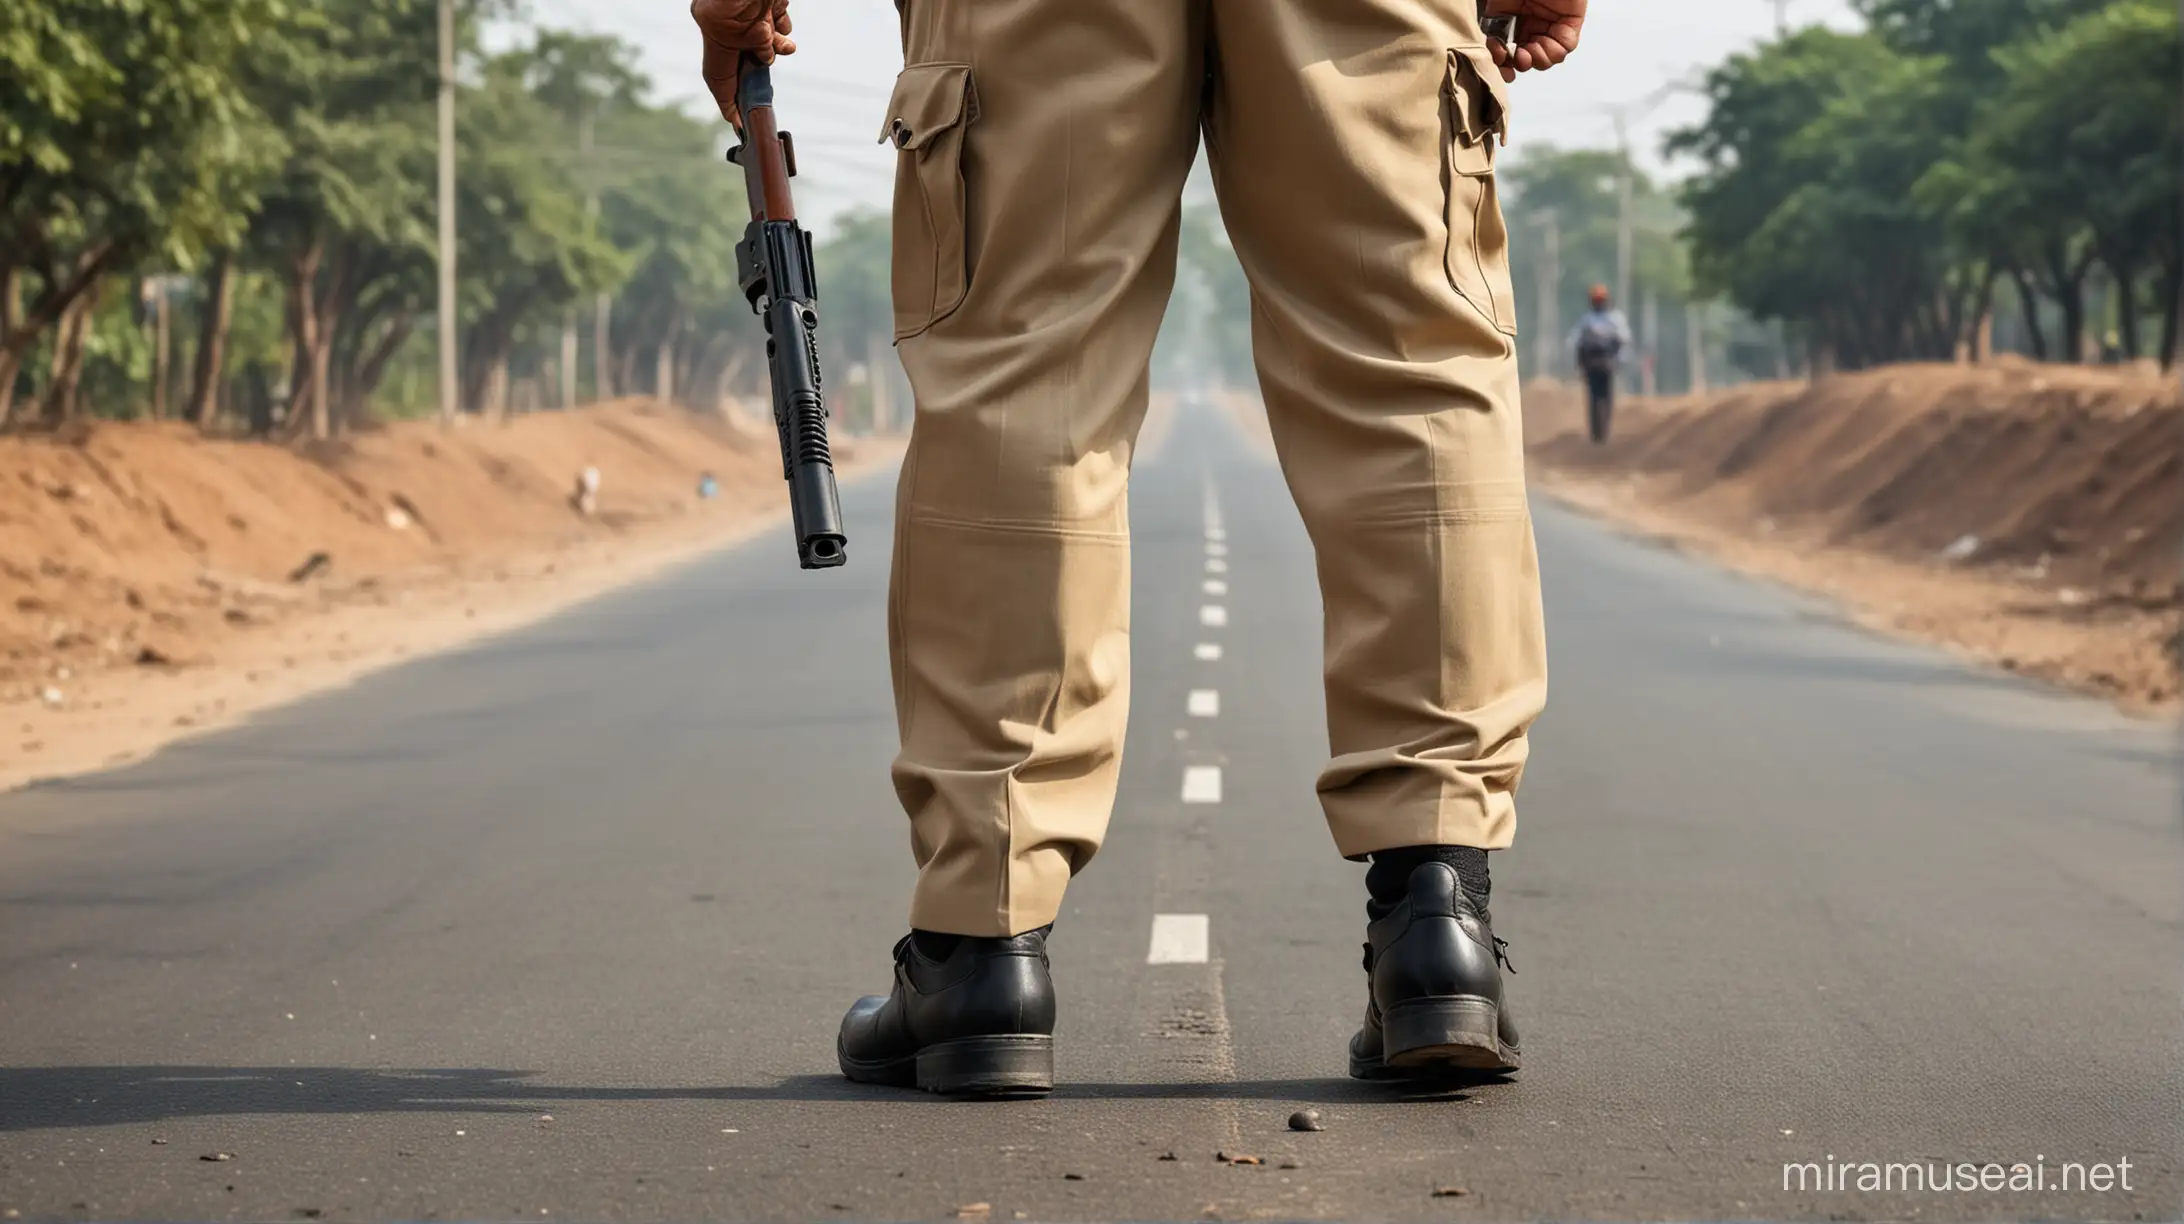 Indian police man standing on indian road, gun in hand, image shot from behind, focus on gun